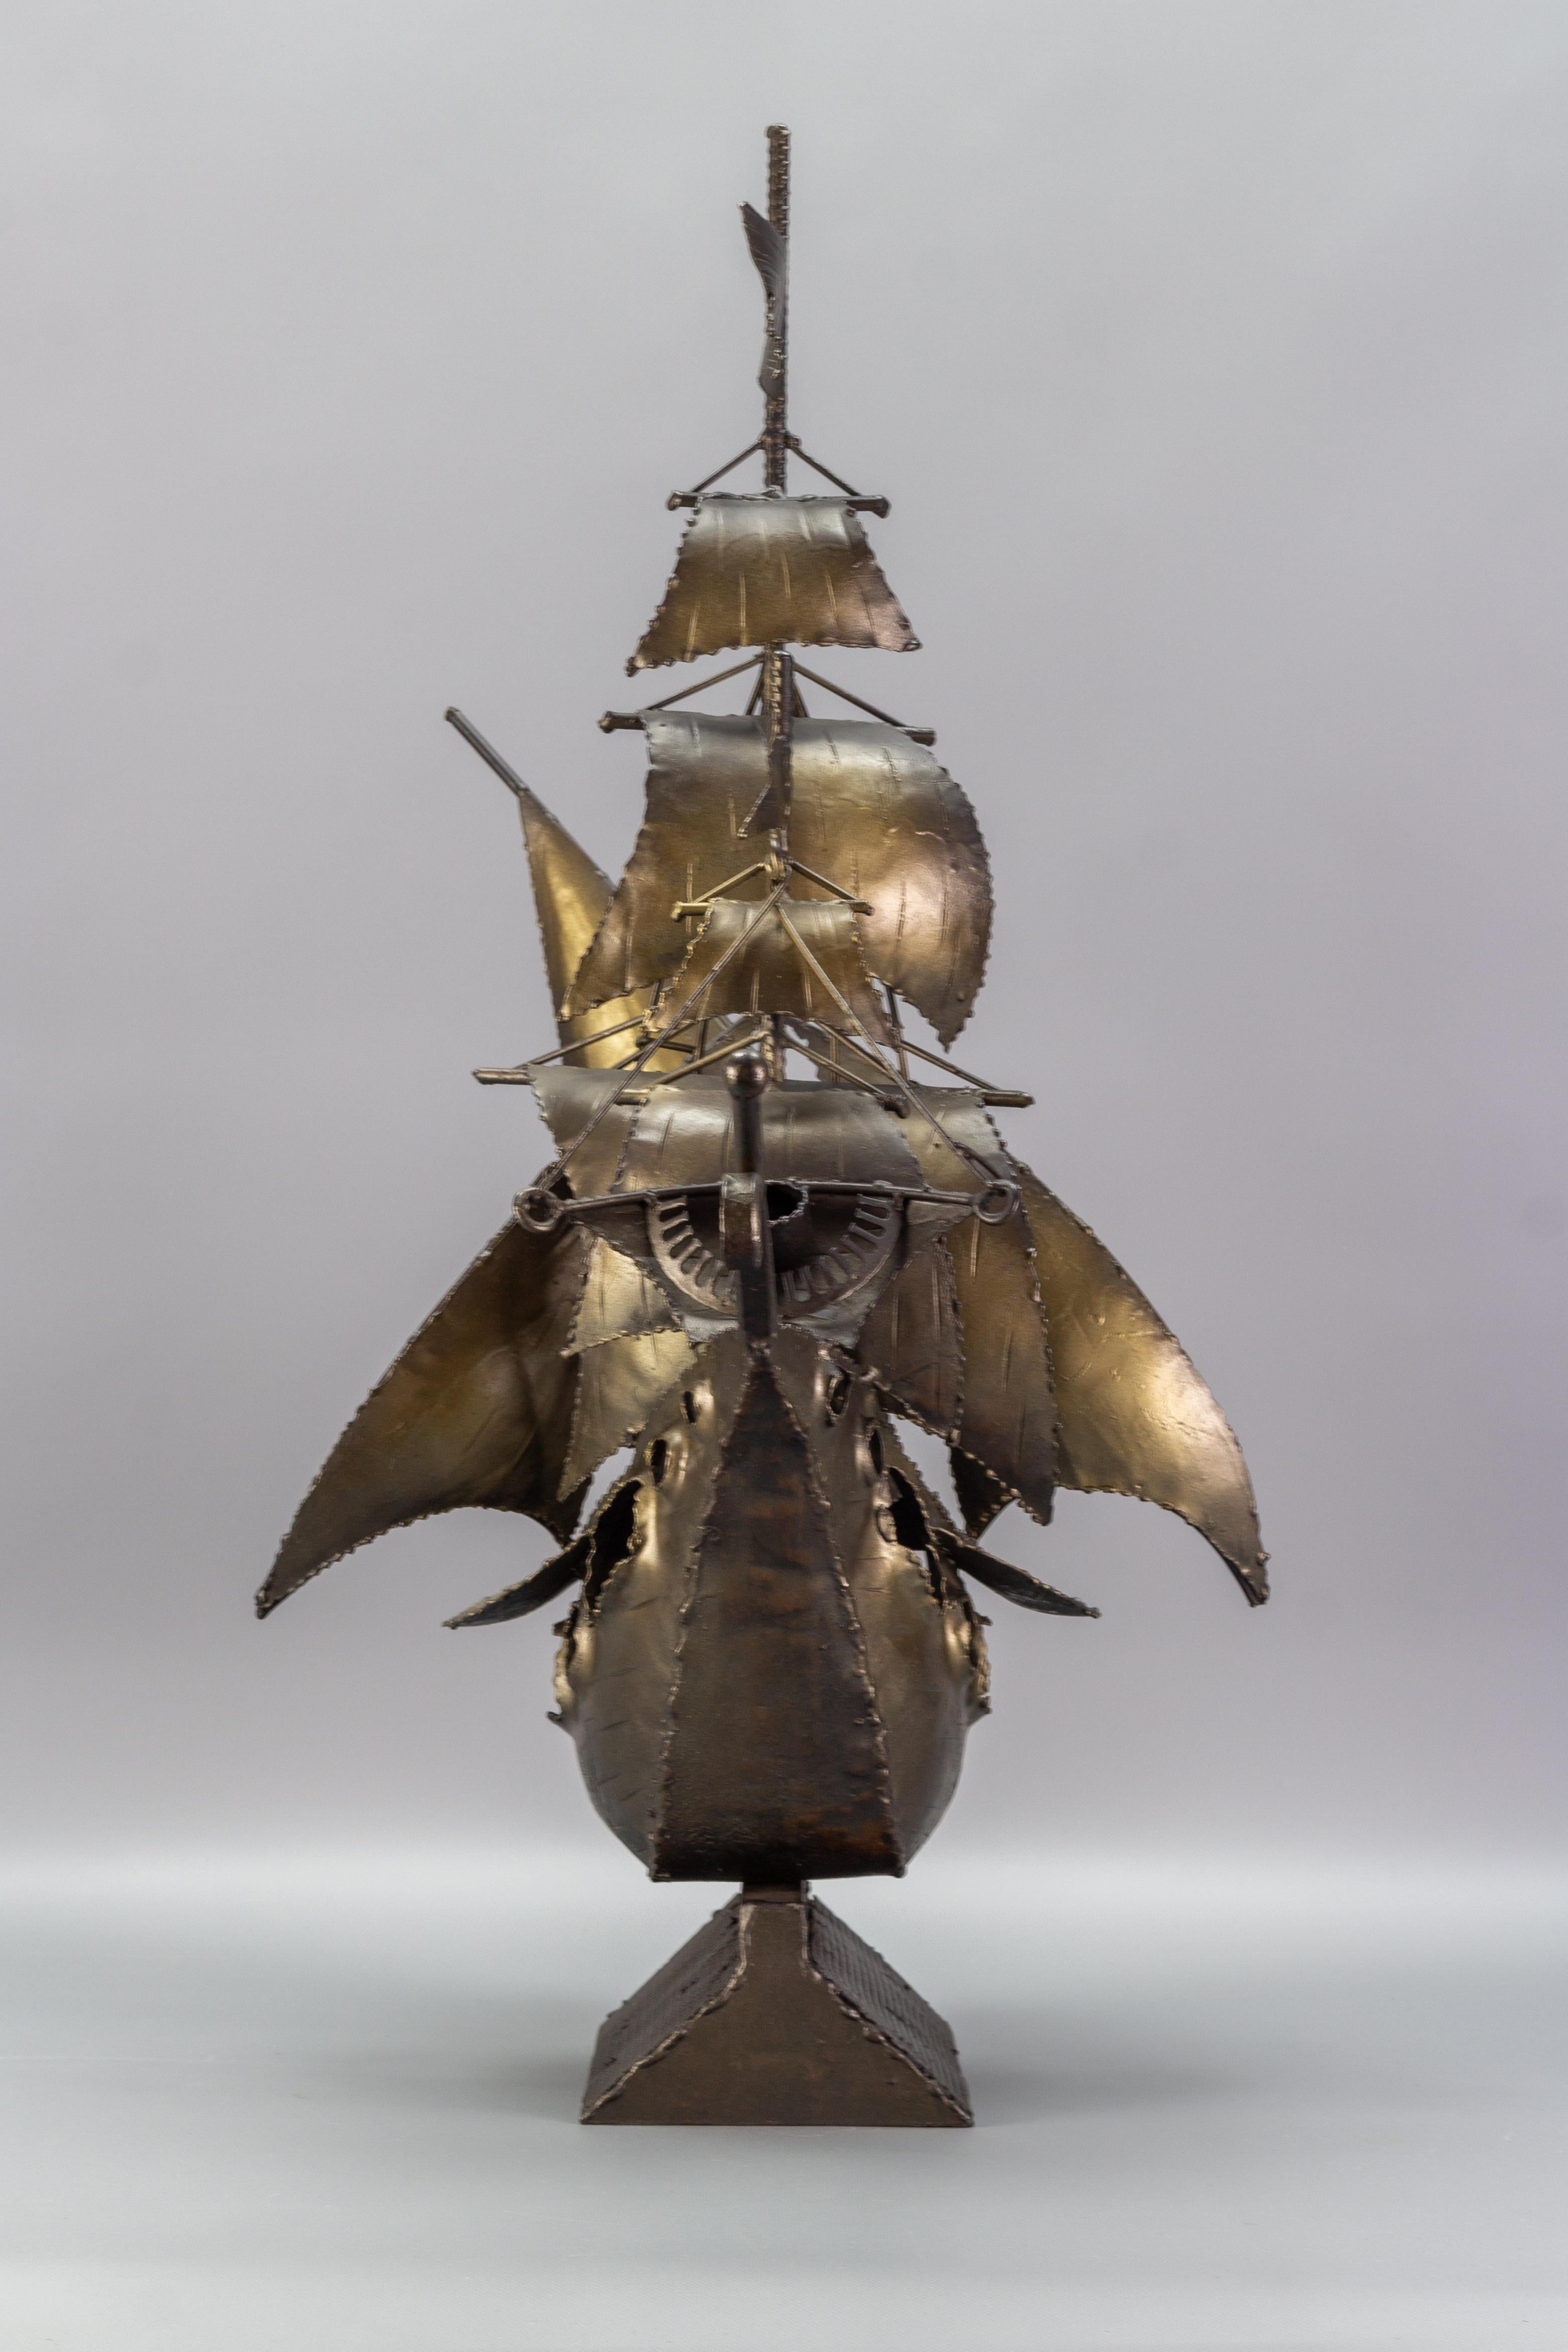 20th Century Industrial Style Metal Art Sailing Ship Sculpture For Sale